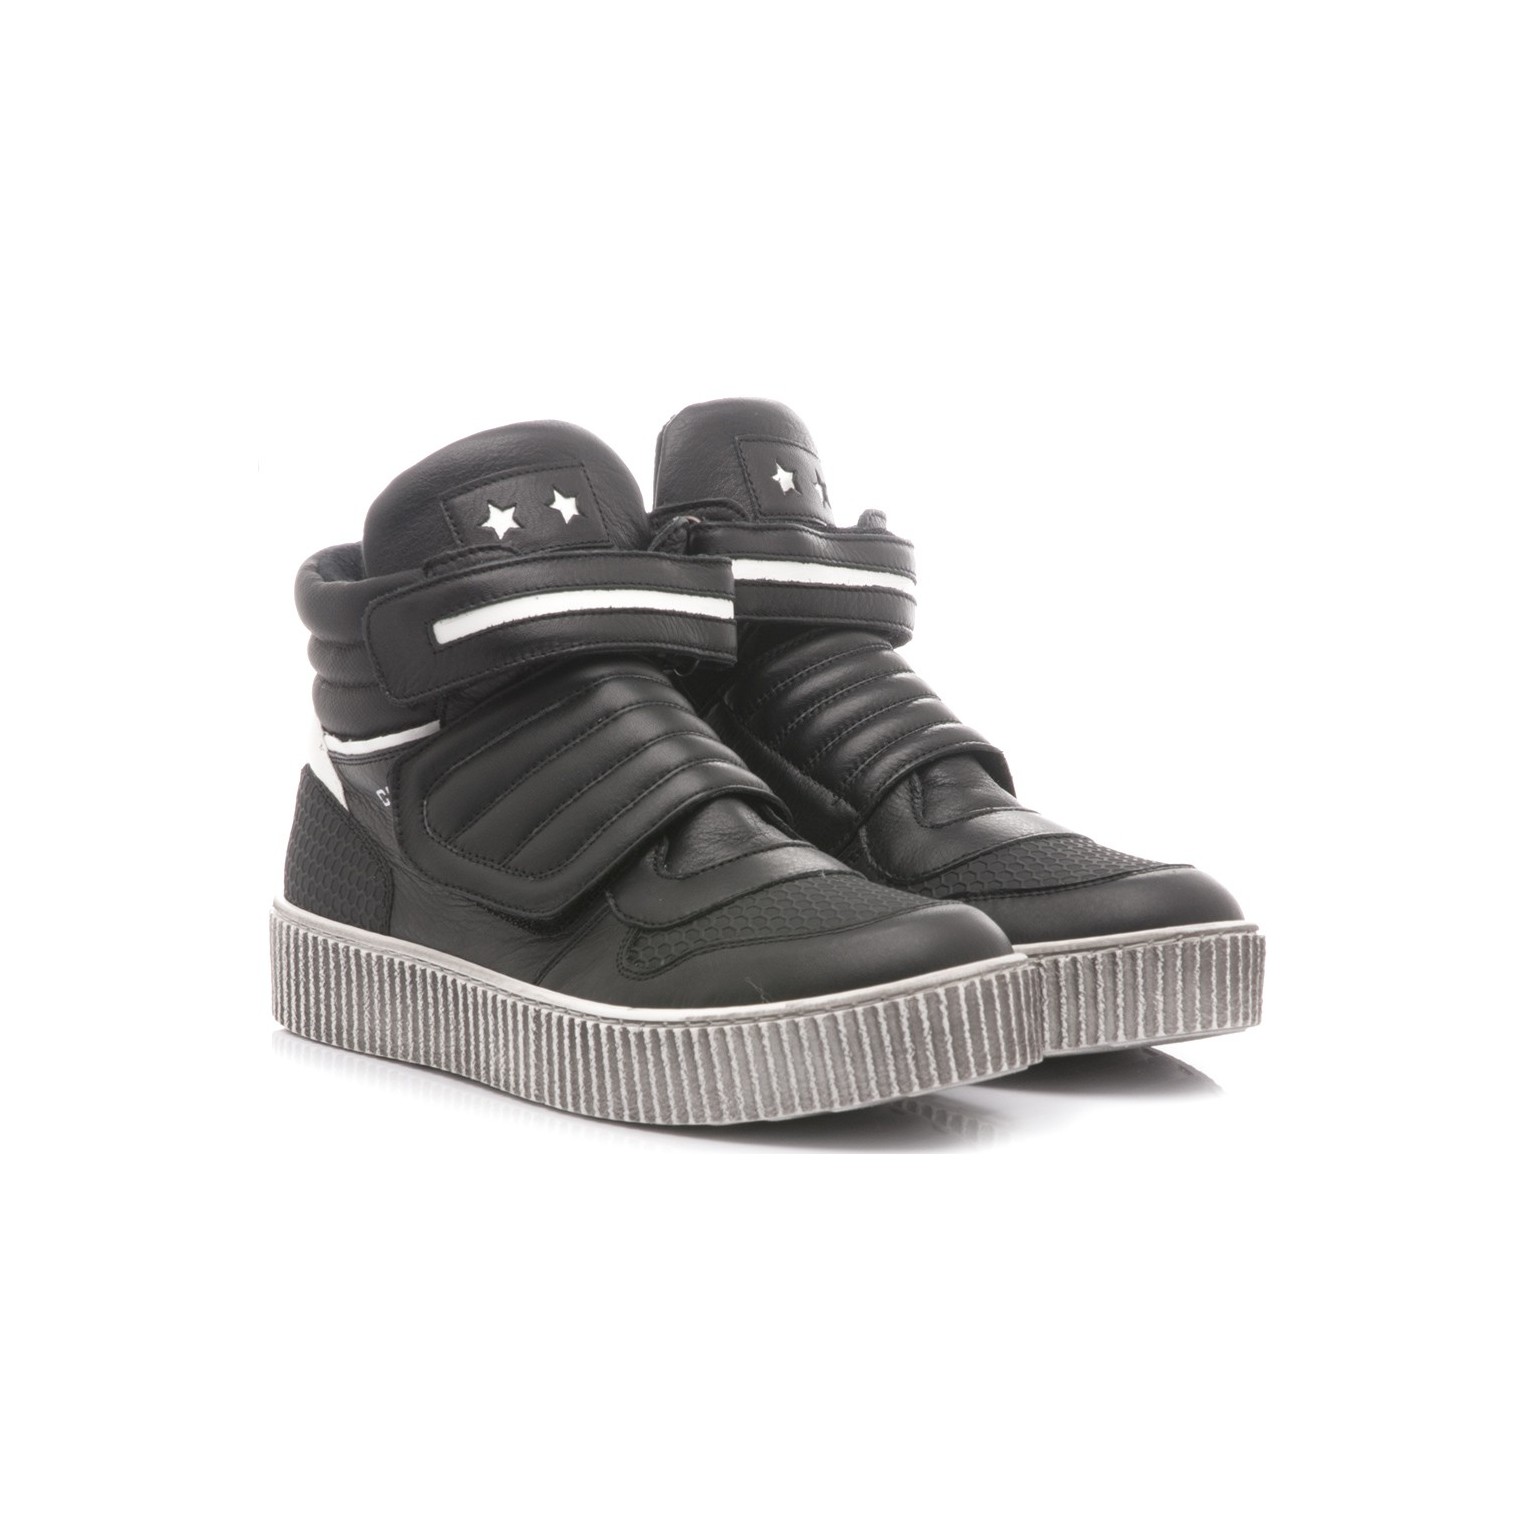 Ciao Children's Sneakers Leather Black 8829